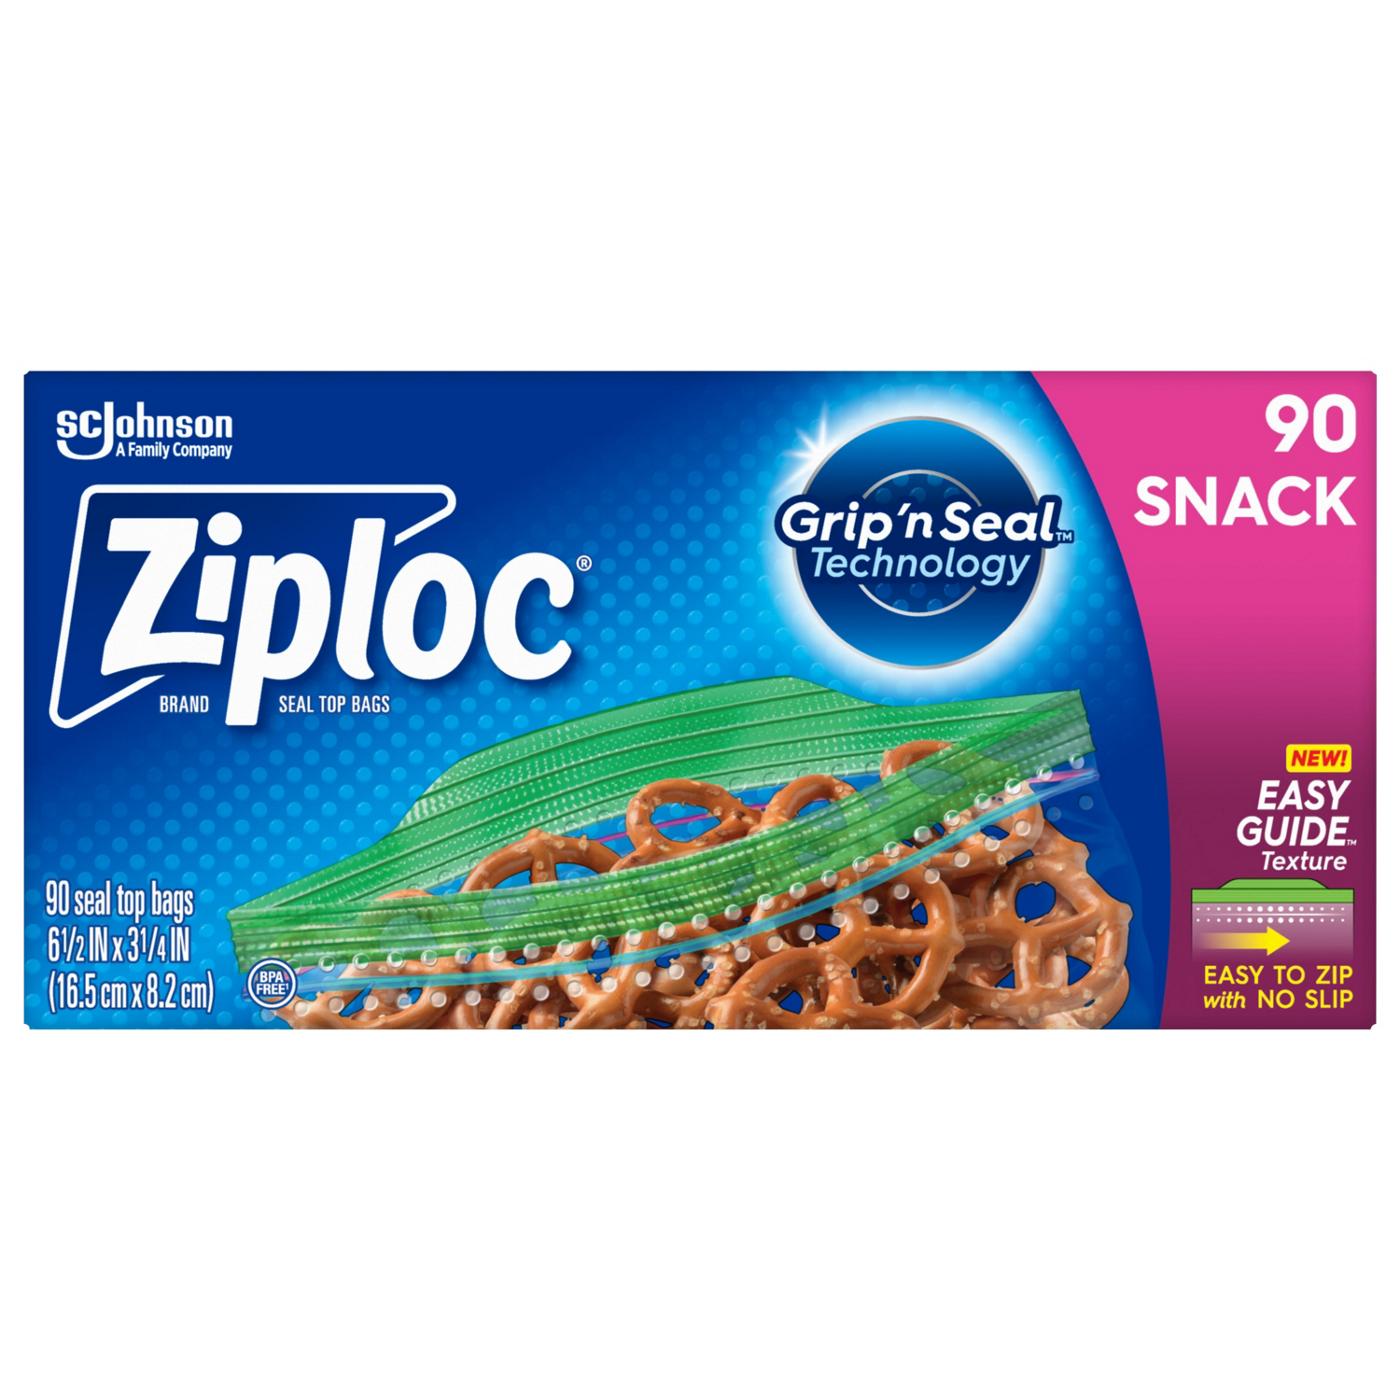 Ziploc Snack Bags with EasyGuide; image 1 of 7